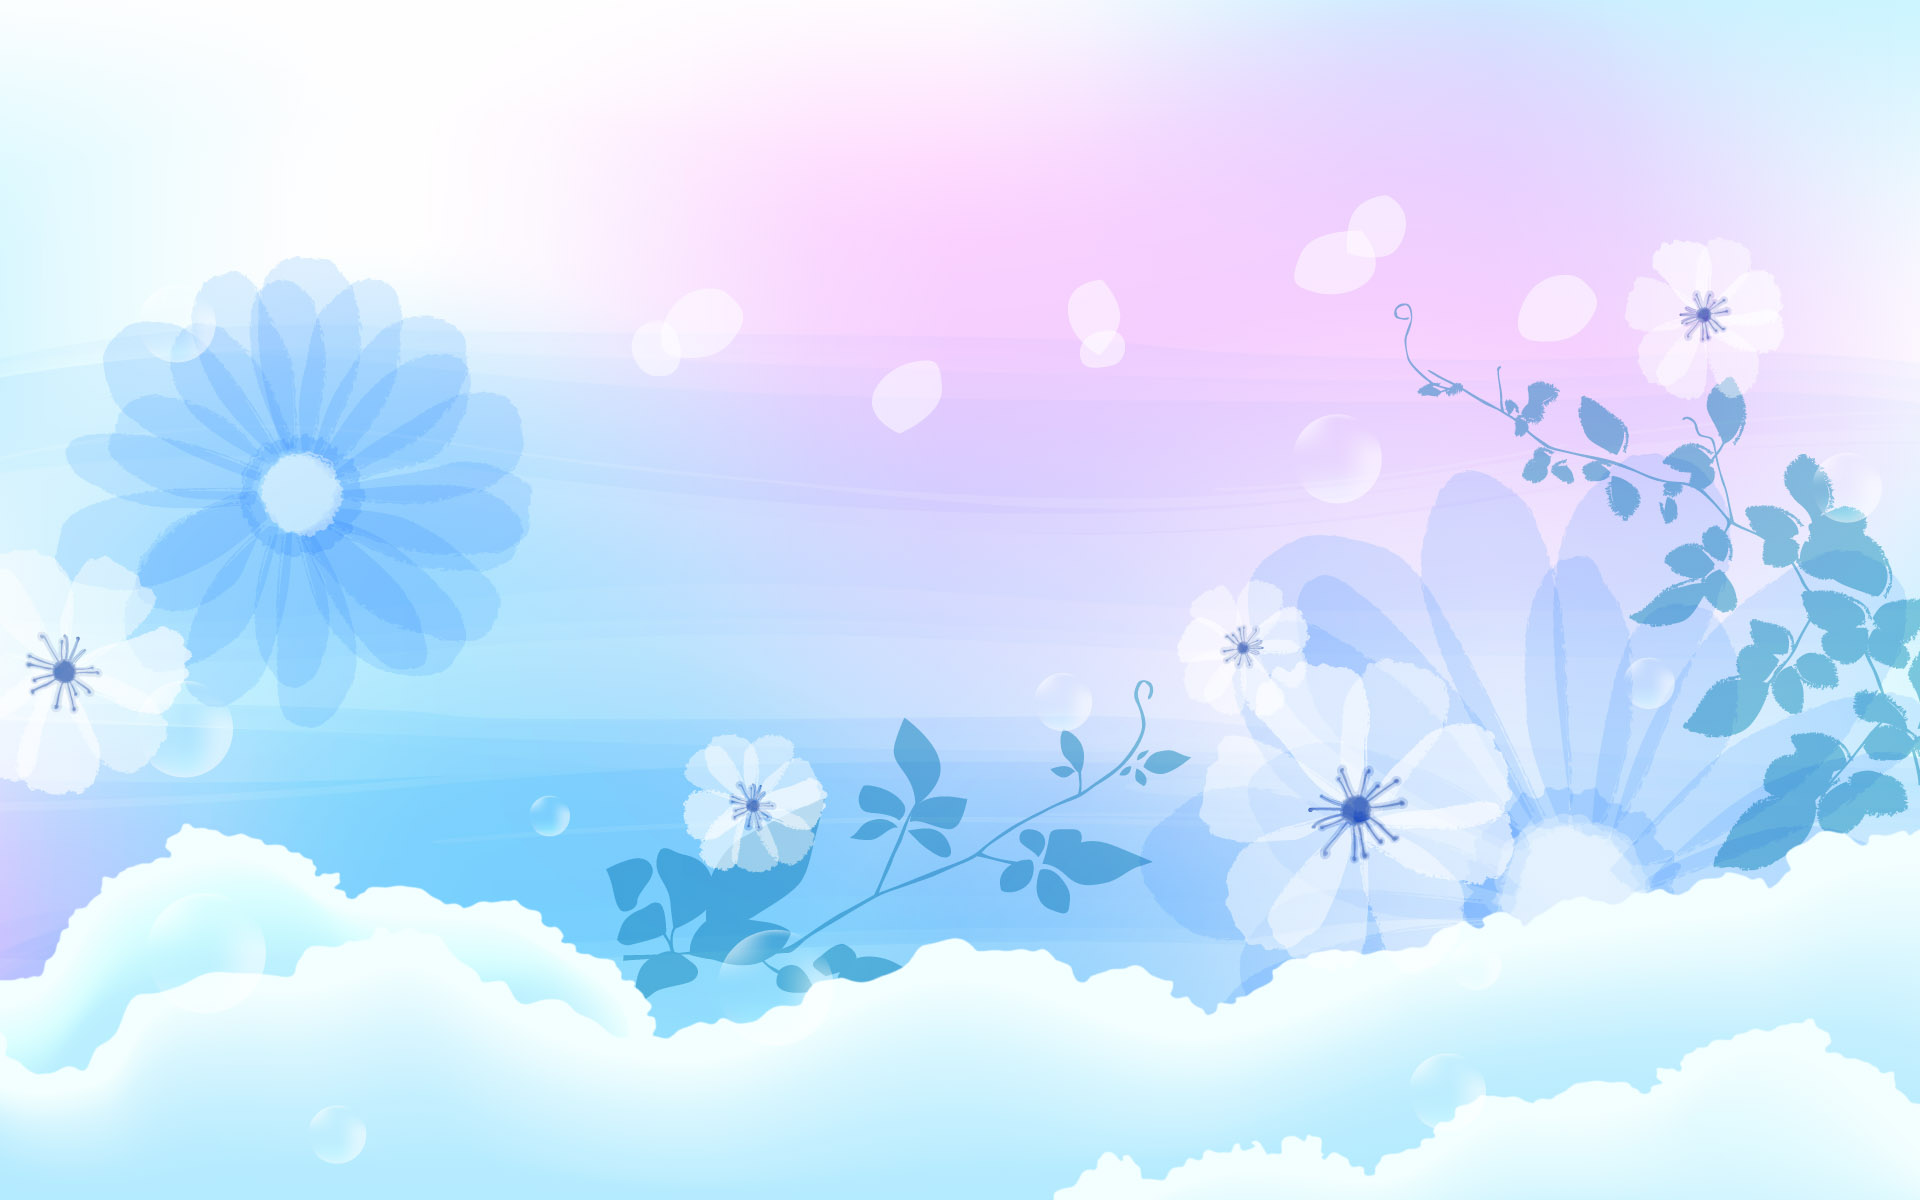 free download the wallpaper Light Blue Flowers and White Background